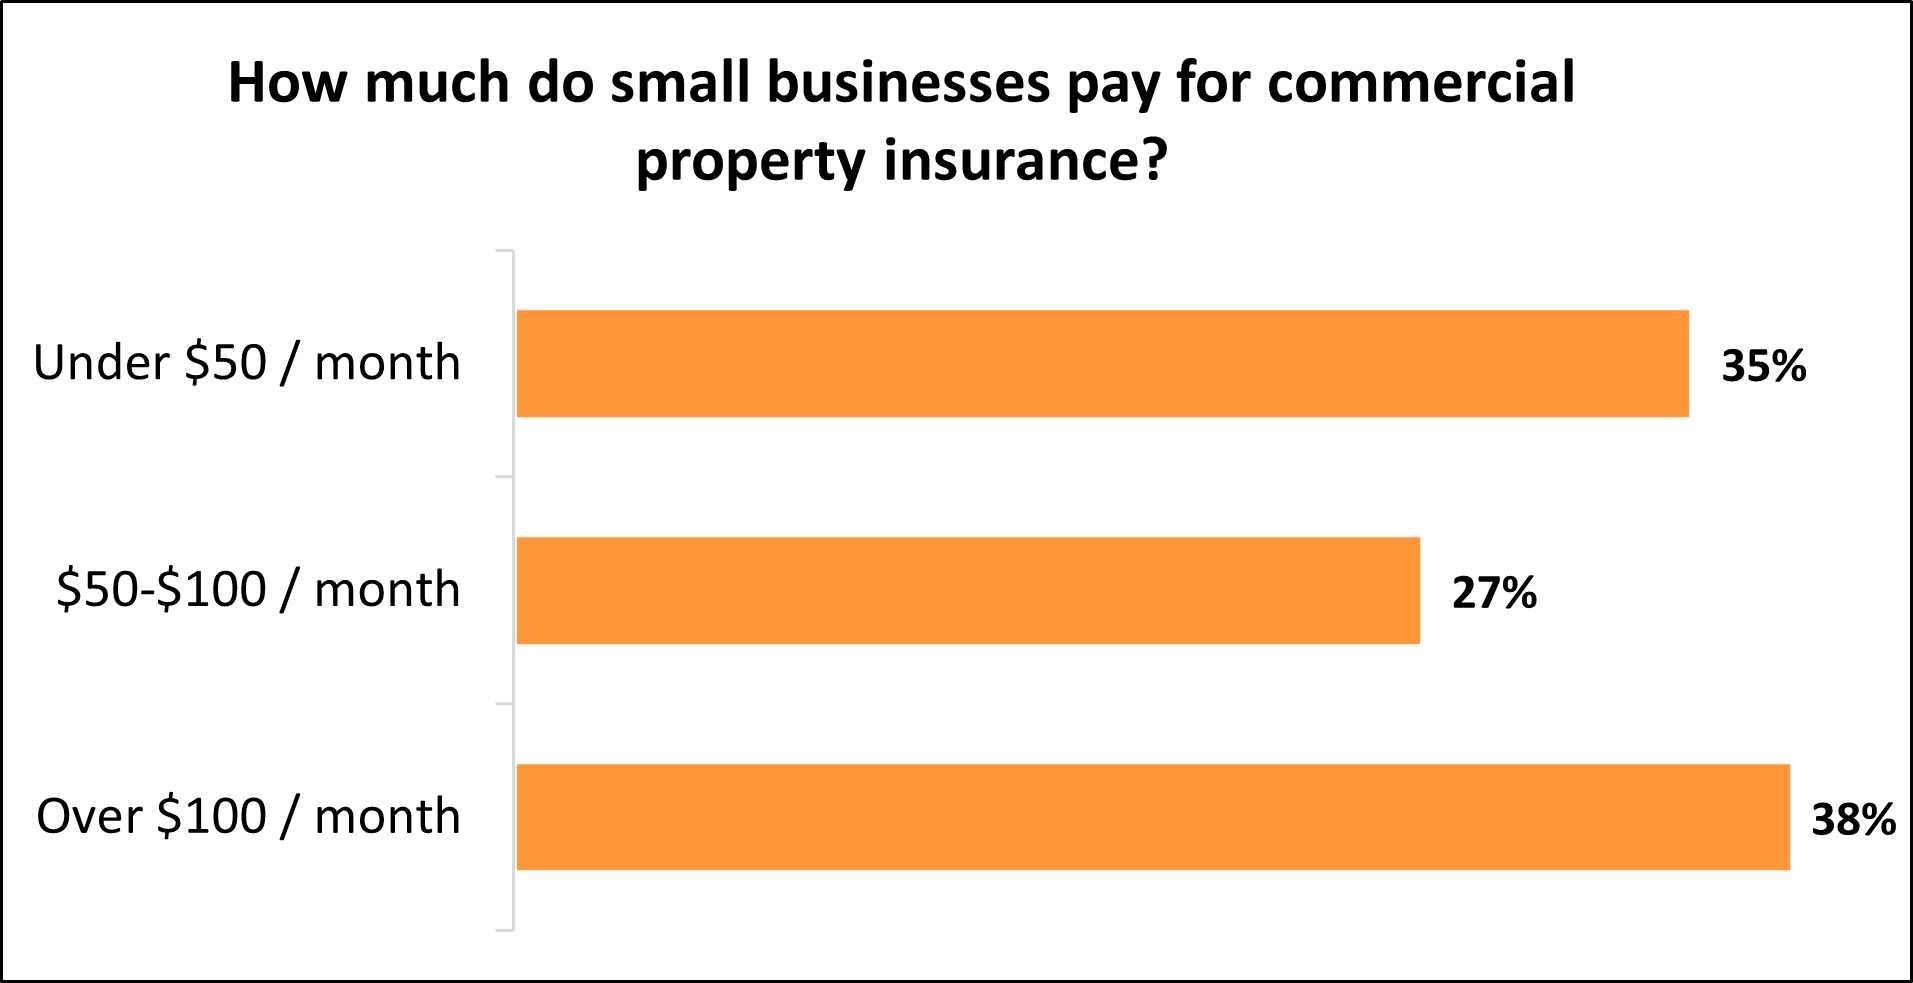 How much do small businesses pay for commercial property insurance?